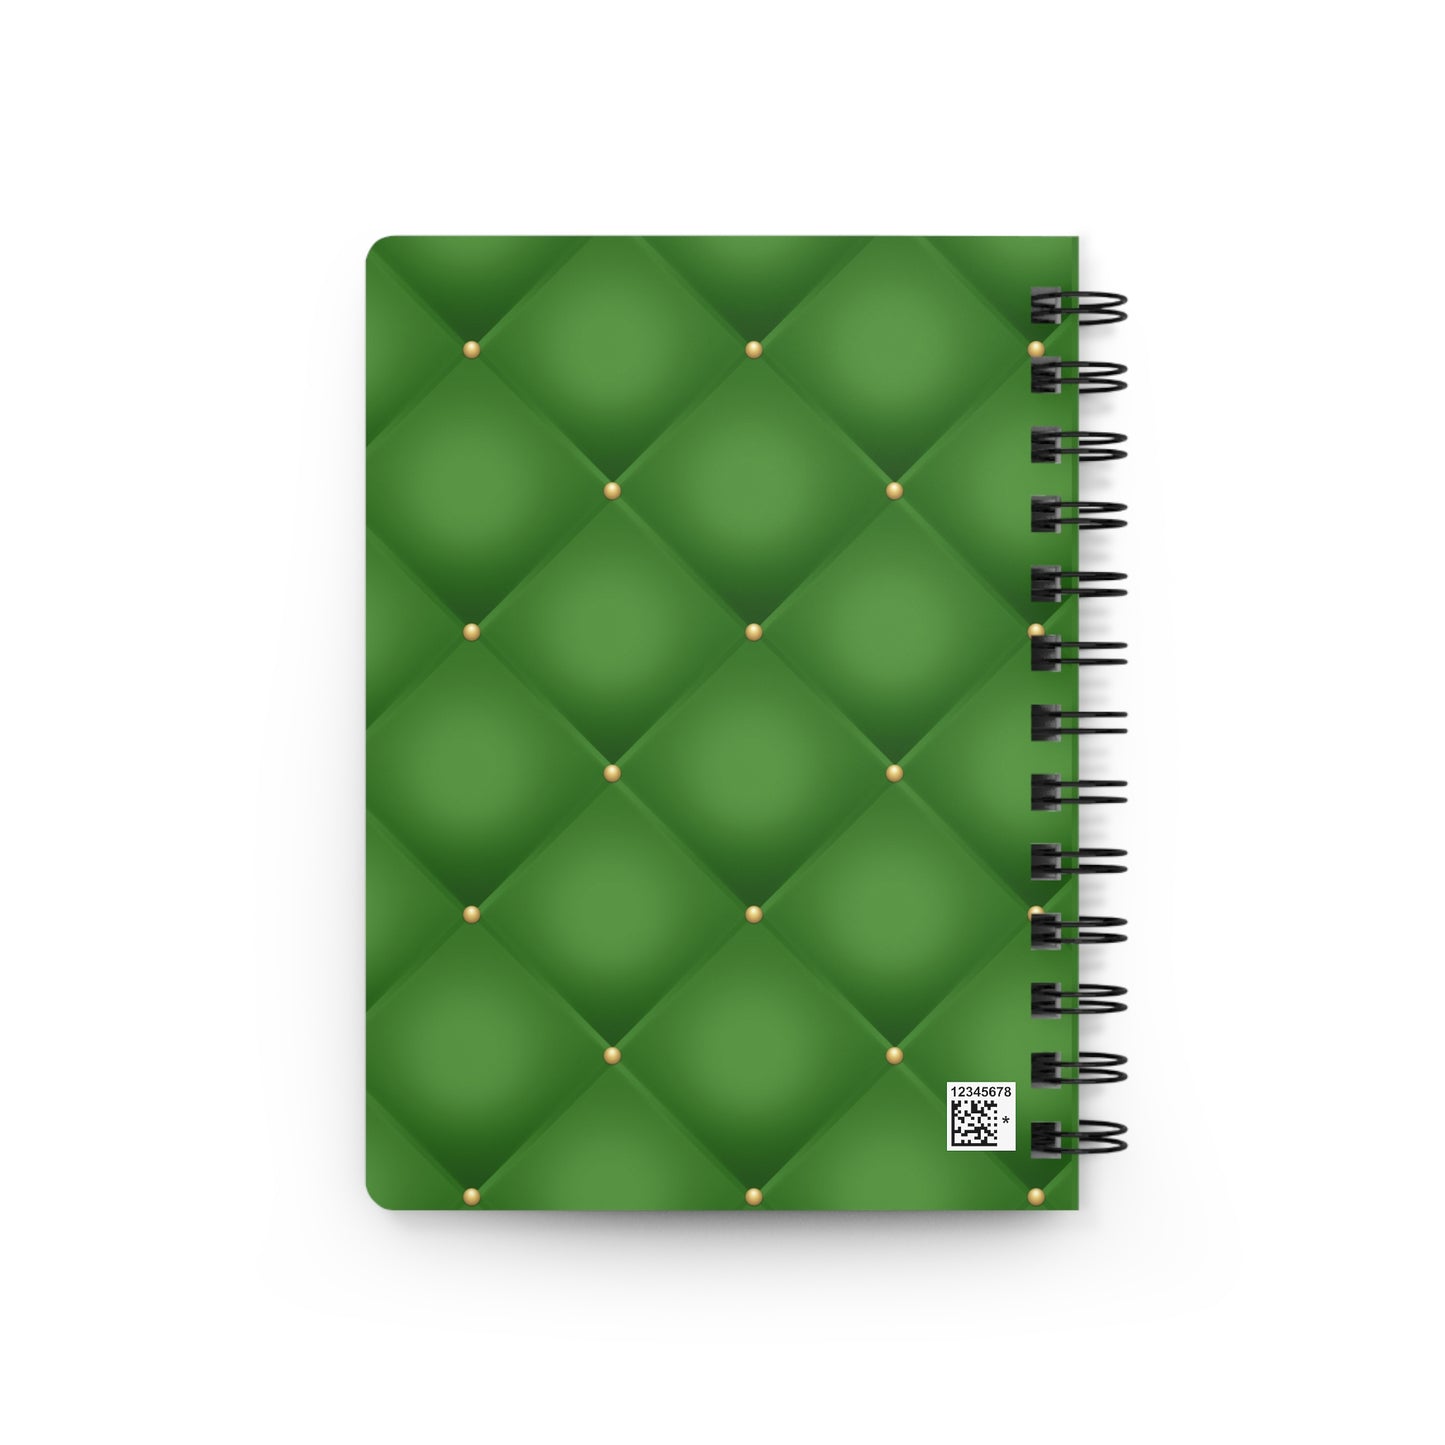 Stop for one minute Tufted Print Green and Gold Spiral Bound Journal